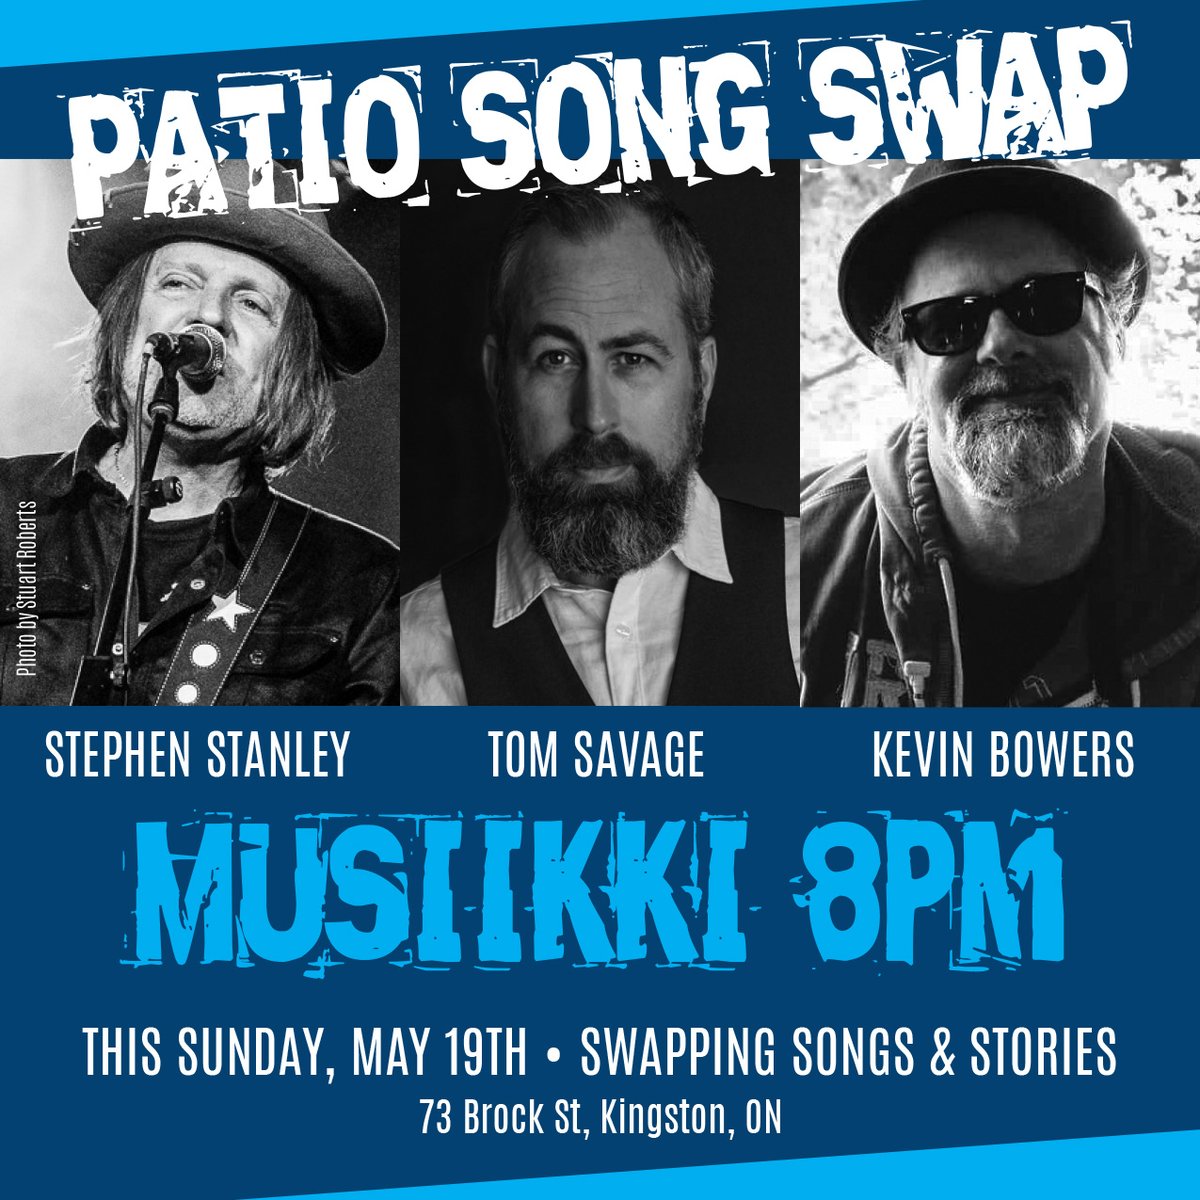 A surprise Sunday gig with my good friends Stephen Stanley and Kevin Bowers! While I've enjoyed the Musiikki patio as an audience member, it will be my first time ever performing in this beautiful setting. Hoping for a warm summery night. 
#livemusic #ygkmusic #songwriters